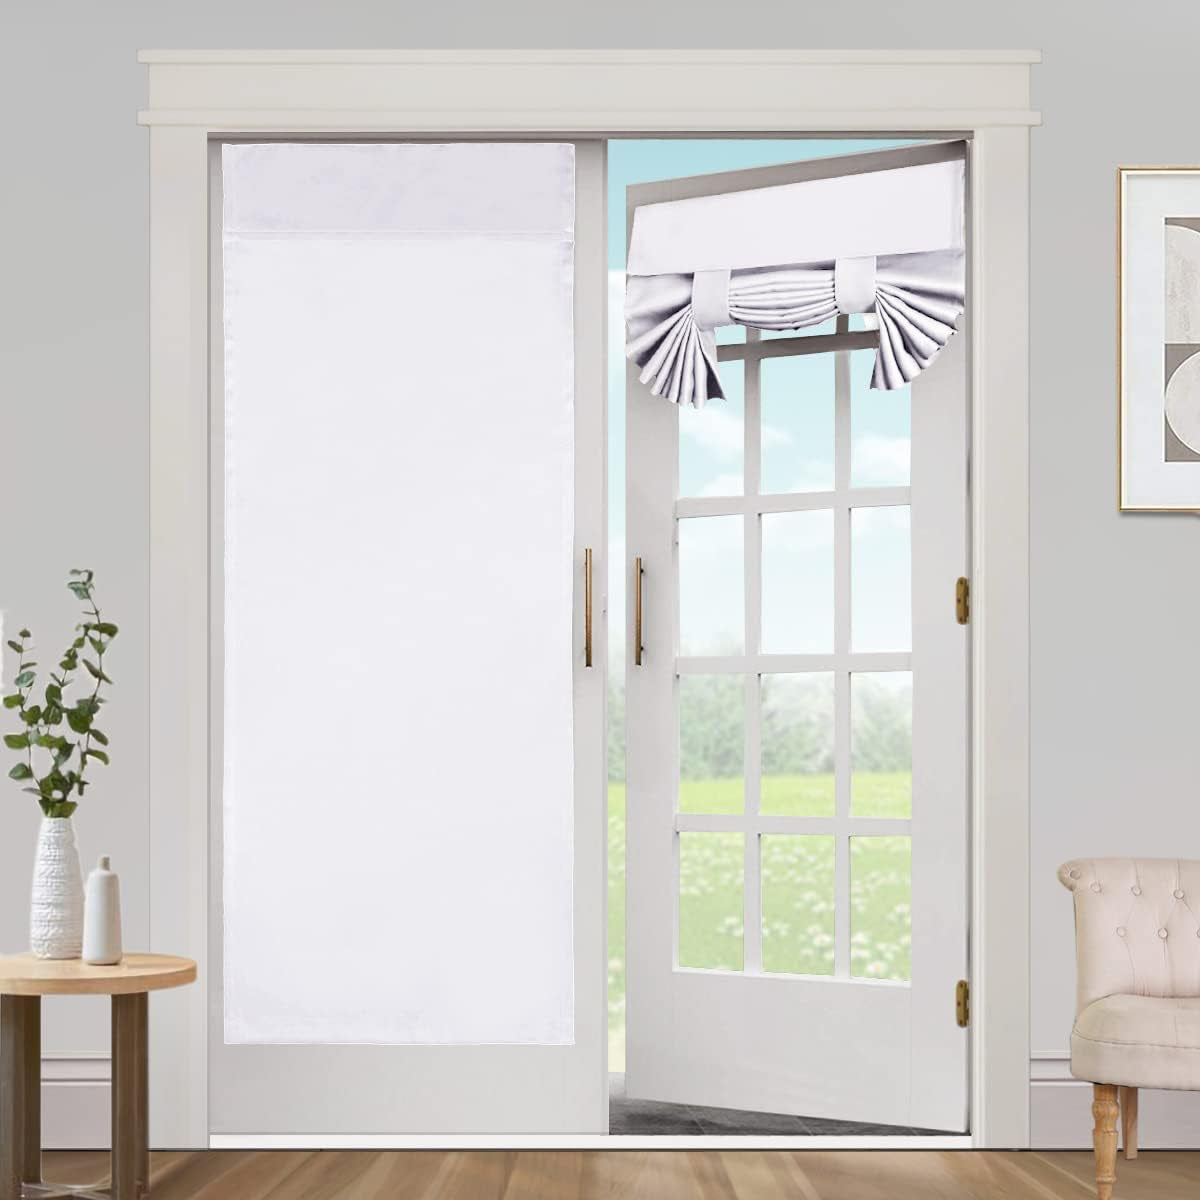 Blackout Curtains for French Doors - Thermal Insulated Tricia Door Window Curtain for Patio Door, Self Stick Tie up Shade Energy Efficient Double Door Blind, 26 X 68 Inches, 1 Panel, Sage  L.VICTEX Greyish White 2 